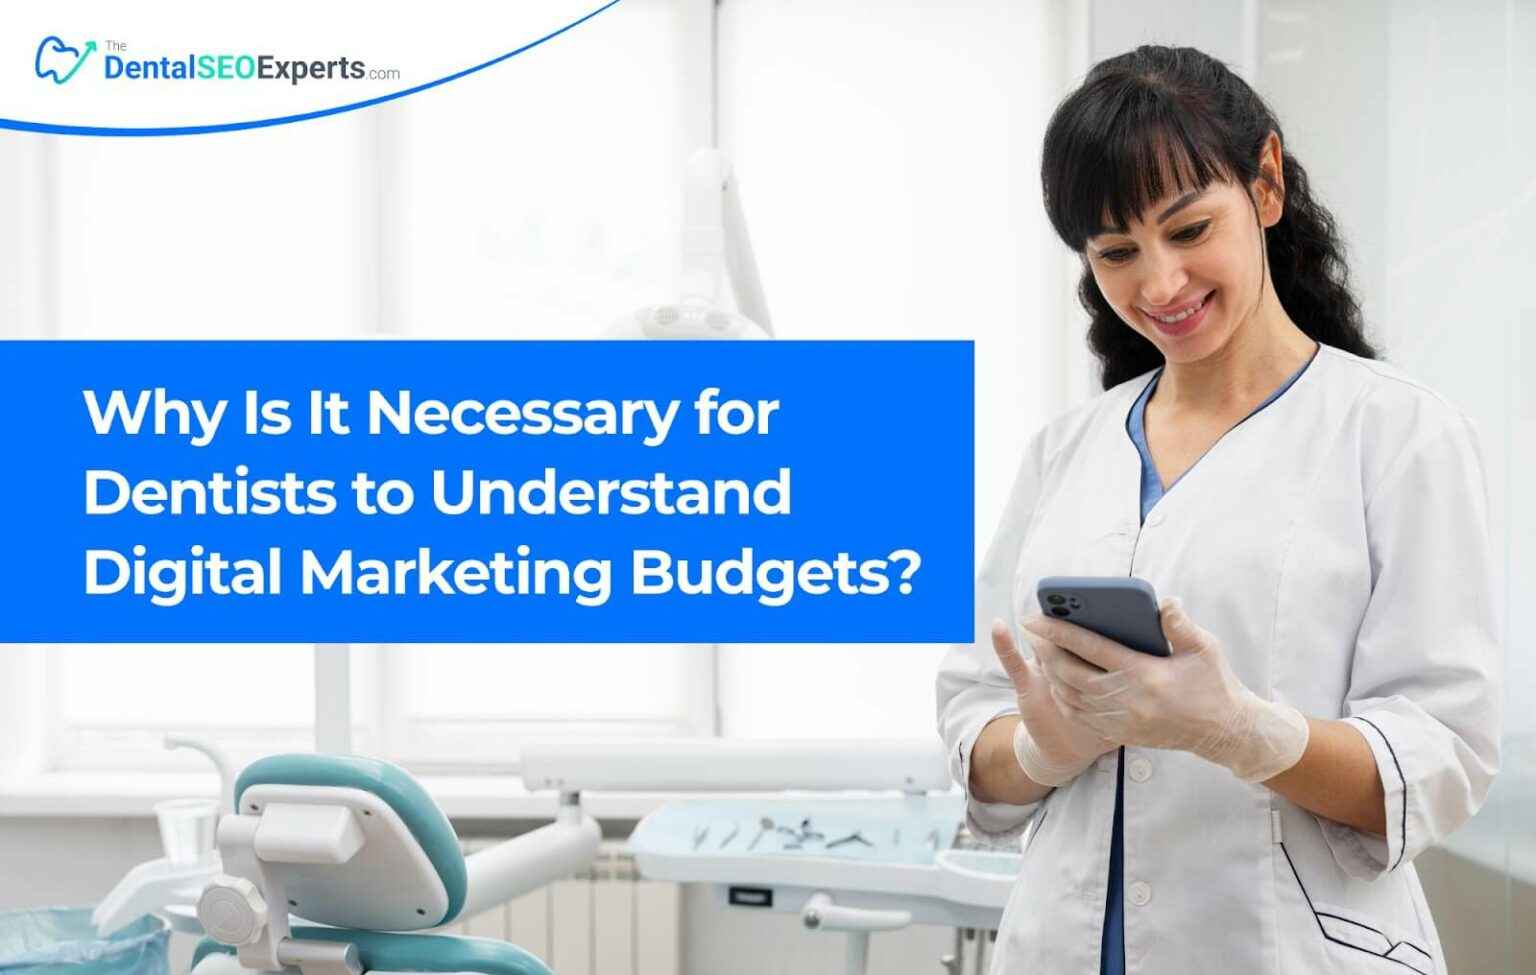 Why Is It Necessary for Dentists to Understand Digital Marketing Budgets?